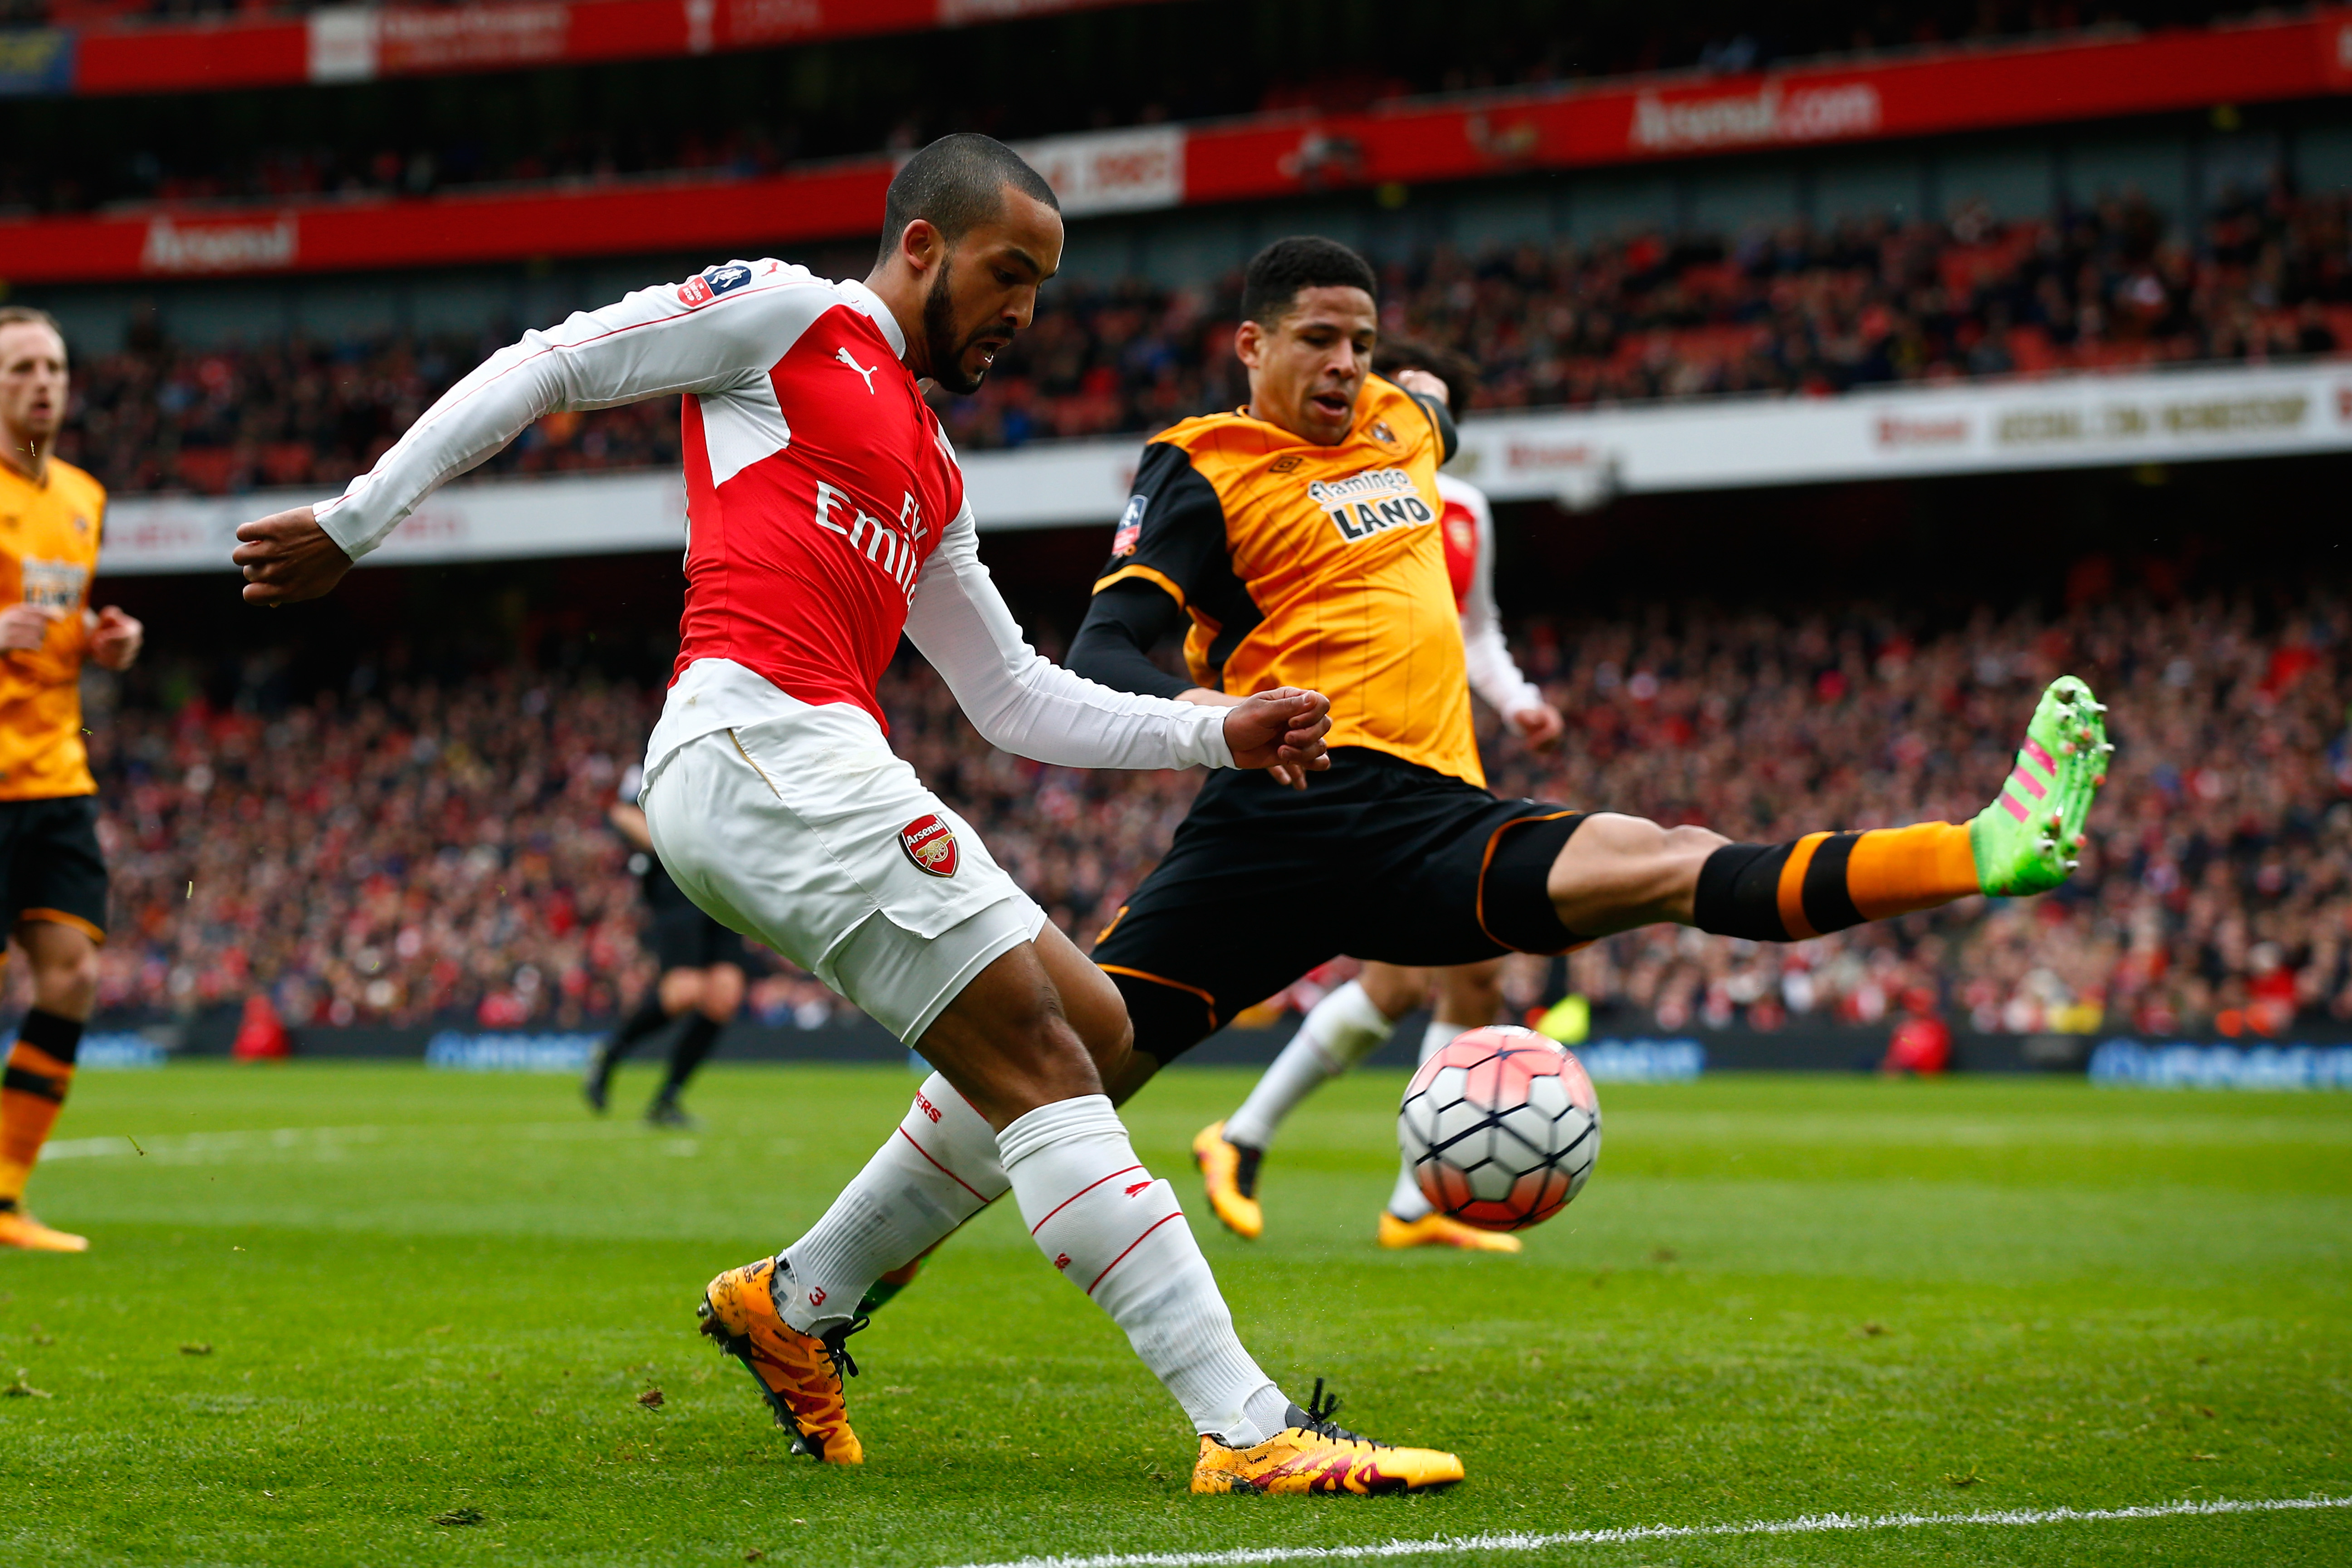 LONDON, ENGLAND - FEBRUARY 20: Theo Walcott of Arsenal and Curtis Davies of Hull City compete for the ball during the Emirates FA Cup fifth round match between Arsenal and Hull City at the Emirates Stadium on February 20, 2016 in London, England.  (Photo by Clive Rose/Getty Images)